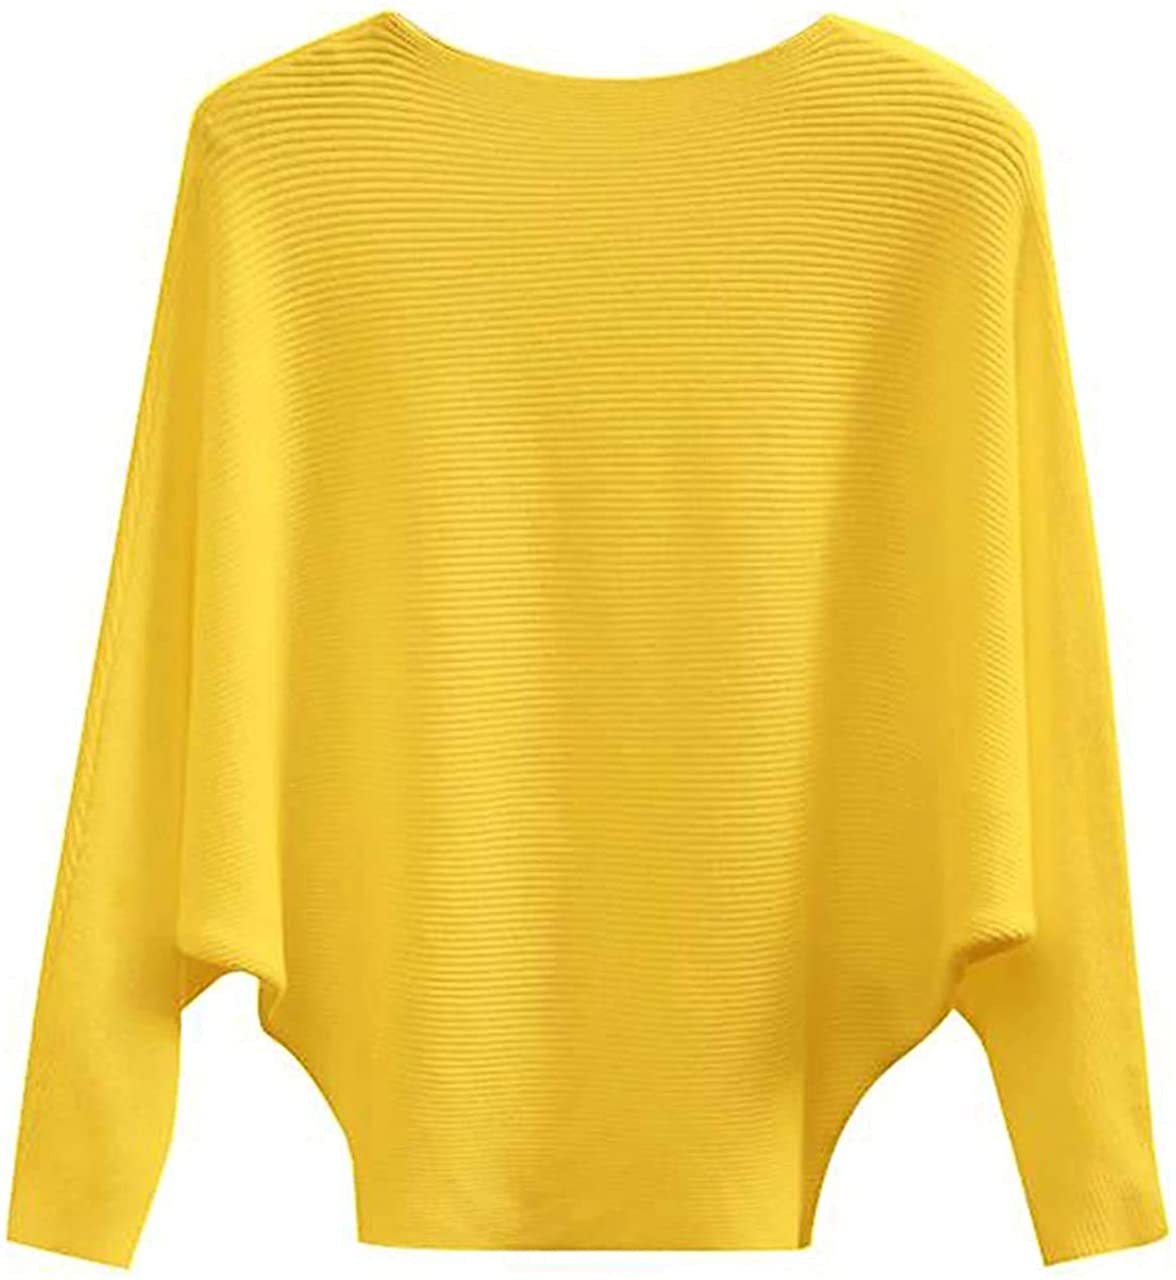 EDSTAR Women Dolman Batwing Sleeves Knitted Sweaters Winter Boat Neck Pullovers Tops